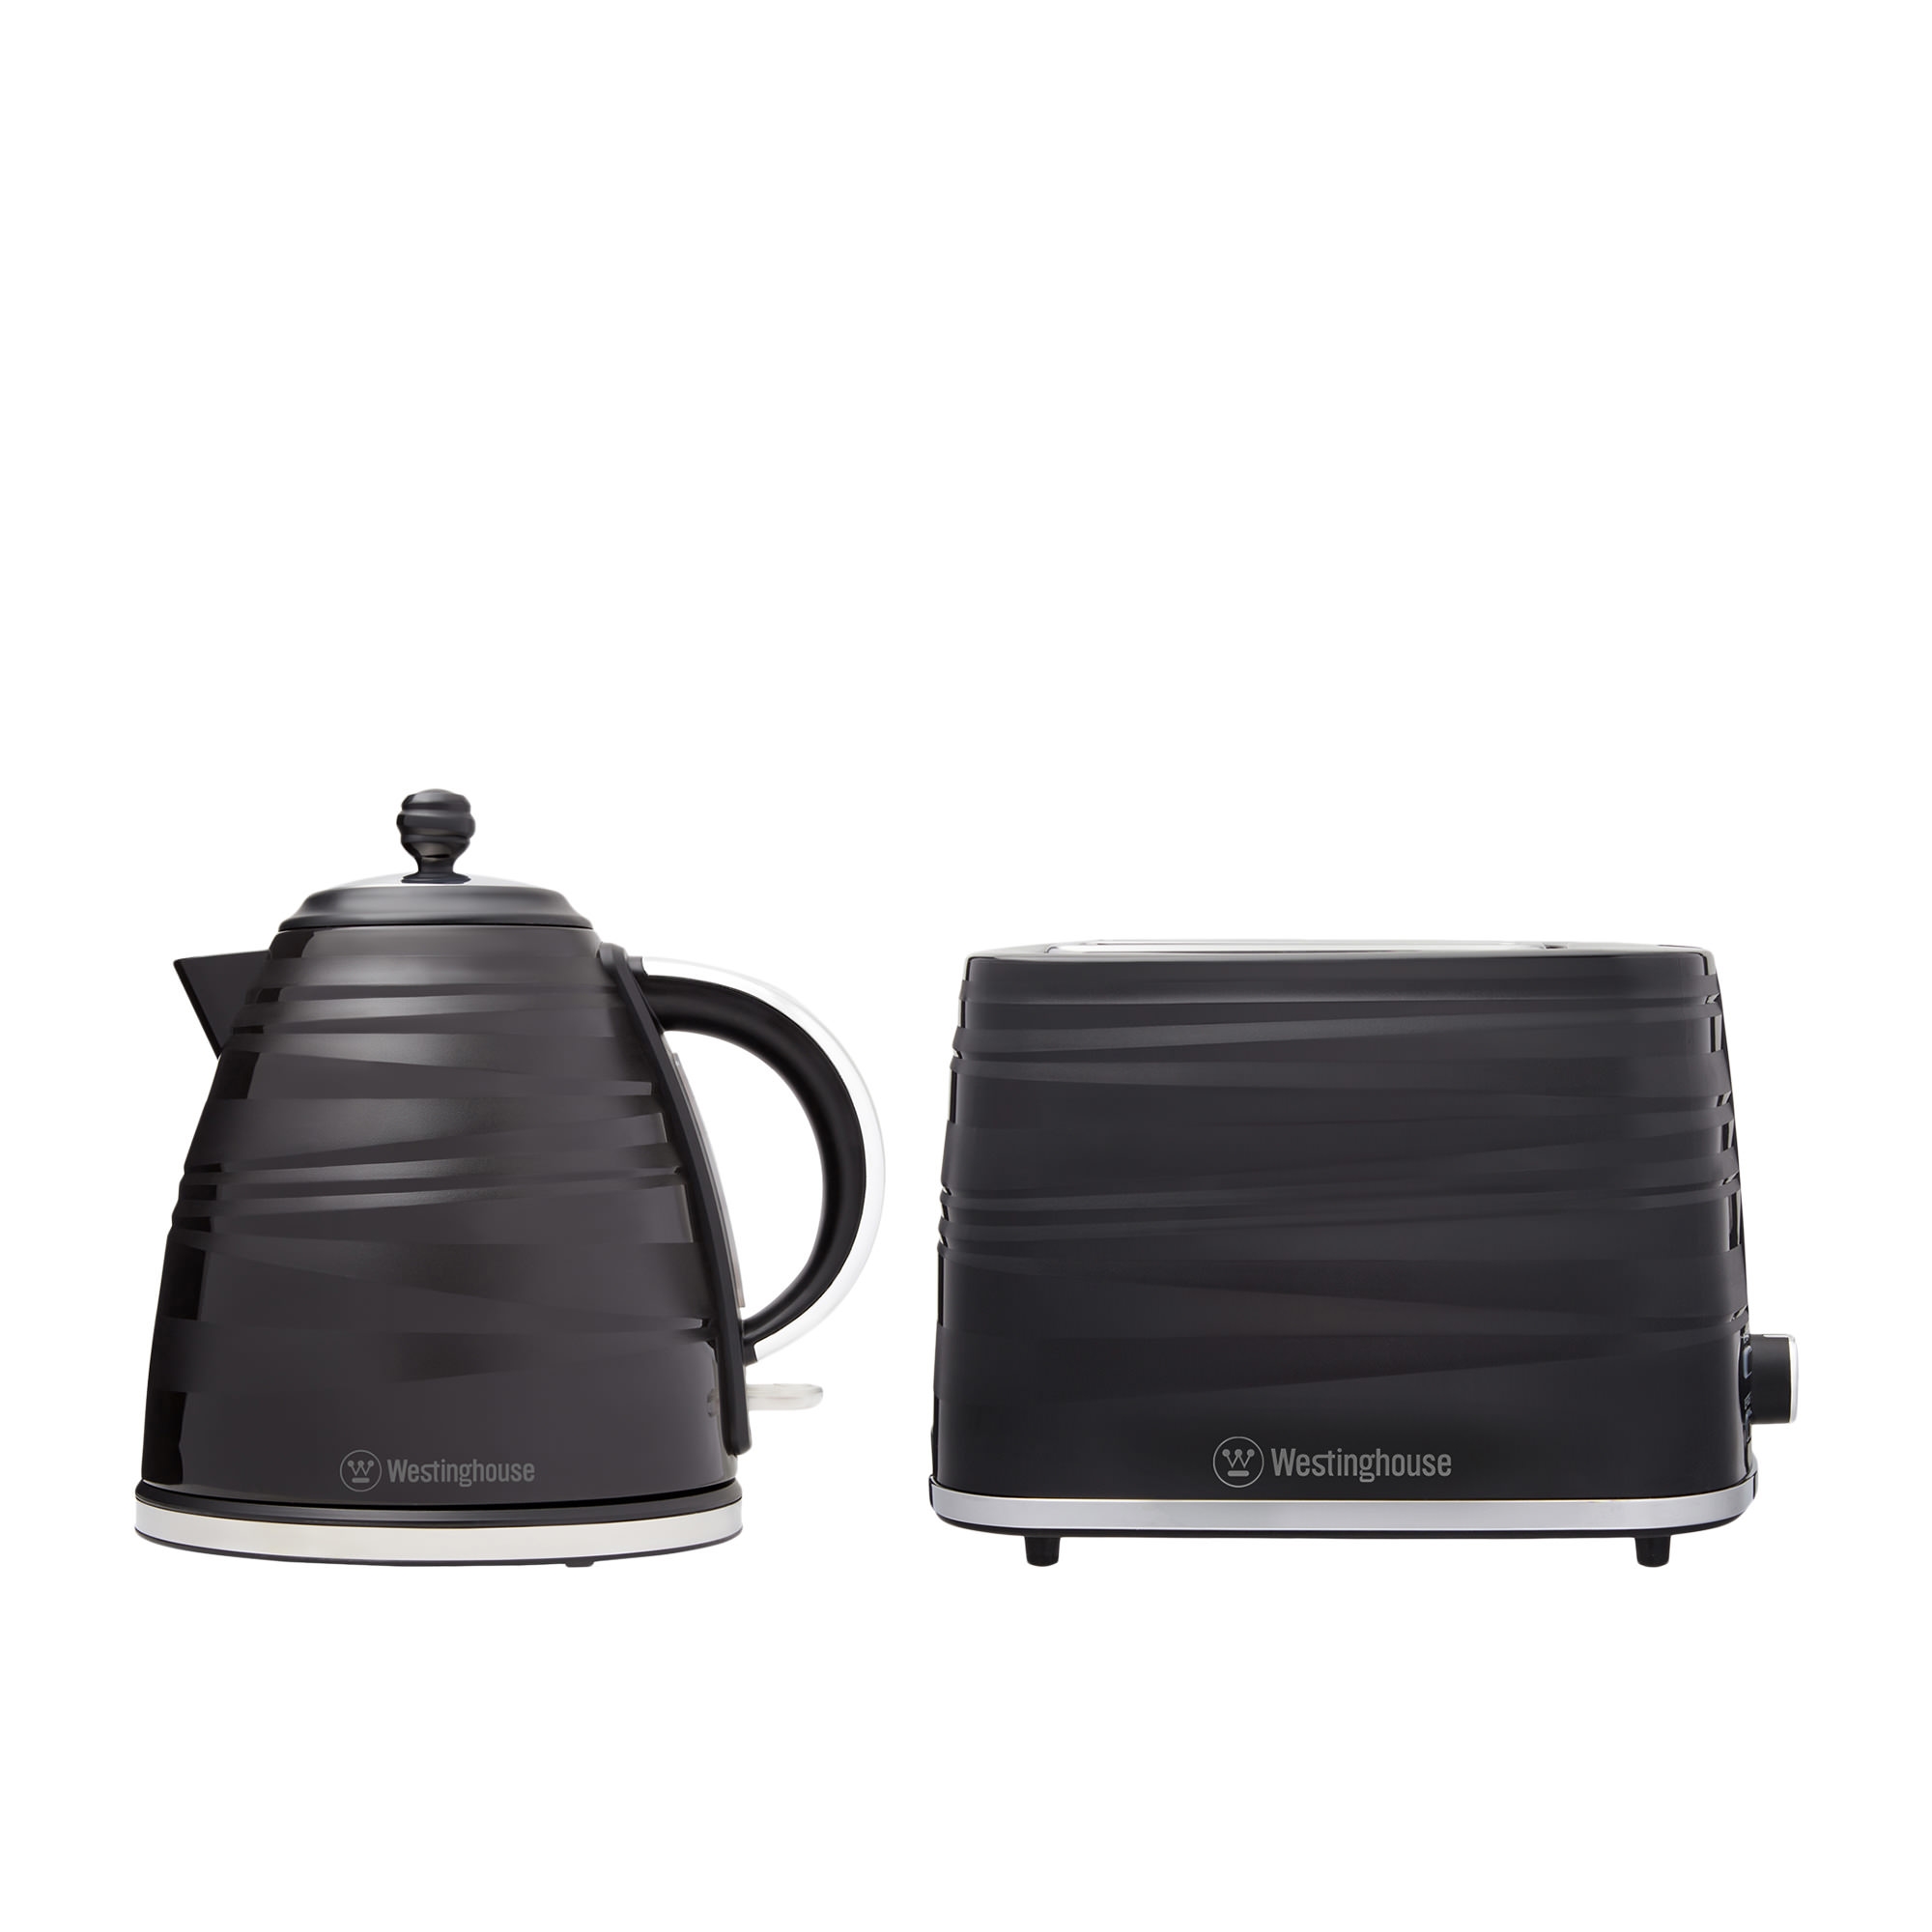 Westinghouse Kettle and Toaster Pack Black Image 1